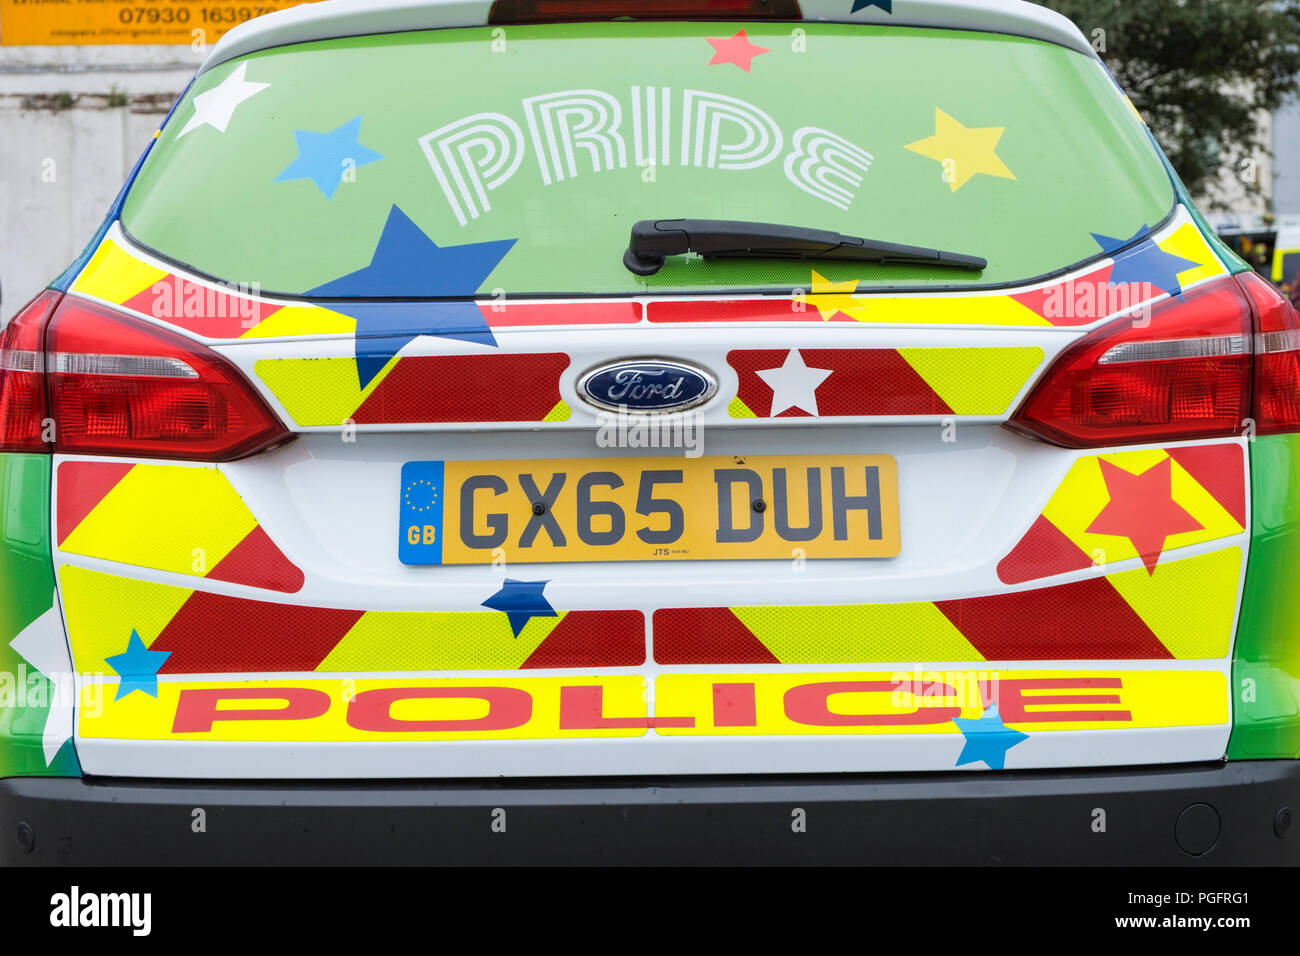 Hastings, East Sussex, UK. 26th Aug, 2018. Hastings pride and festival parade celebrates diversity in this seaside town on the south east coast. This years theme is no discrimination, no alienation. The event runs from 11am until late in the evening. Police car shows support with rainbow pride colours. Police pride. © Paul Lawrenson 2018, Photo Credit: Paul Lawrenson / Alamy Live News Stock Photo